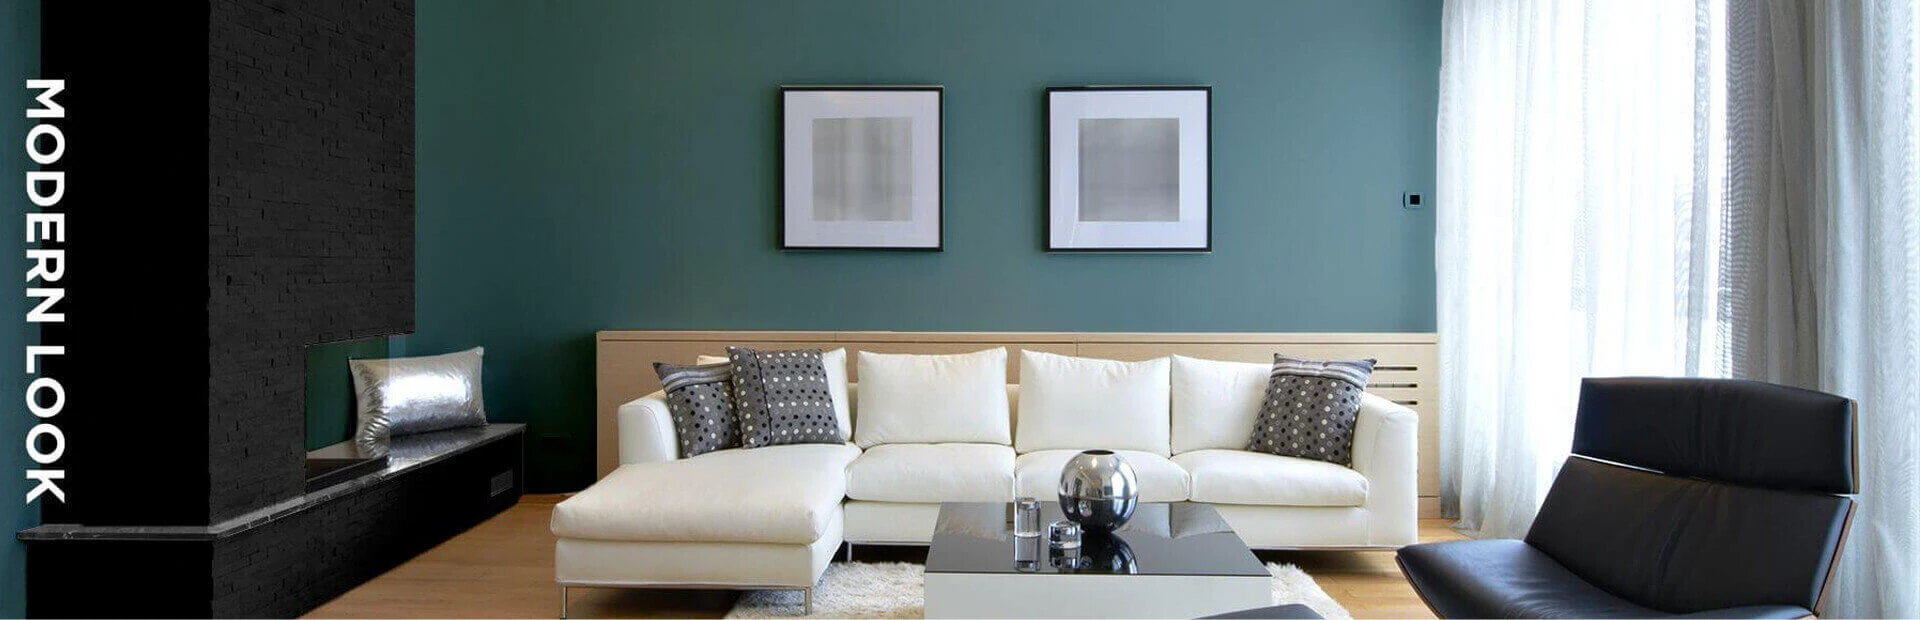 Living room with beige, black and green colour palette.